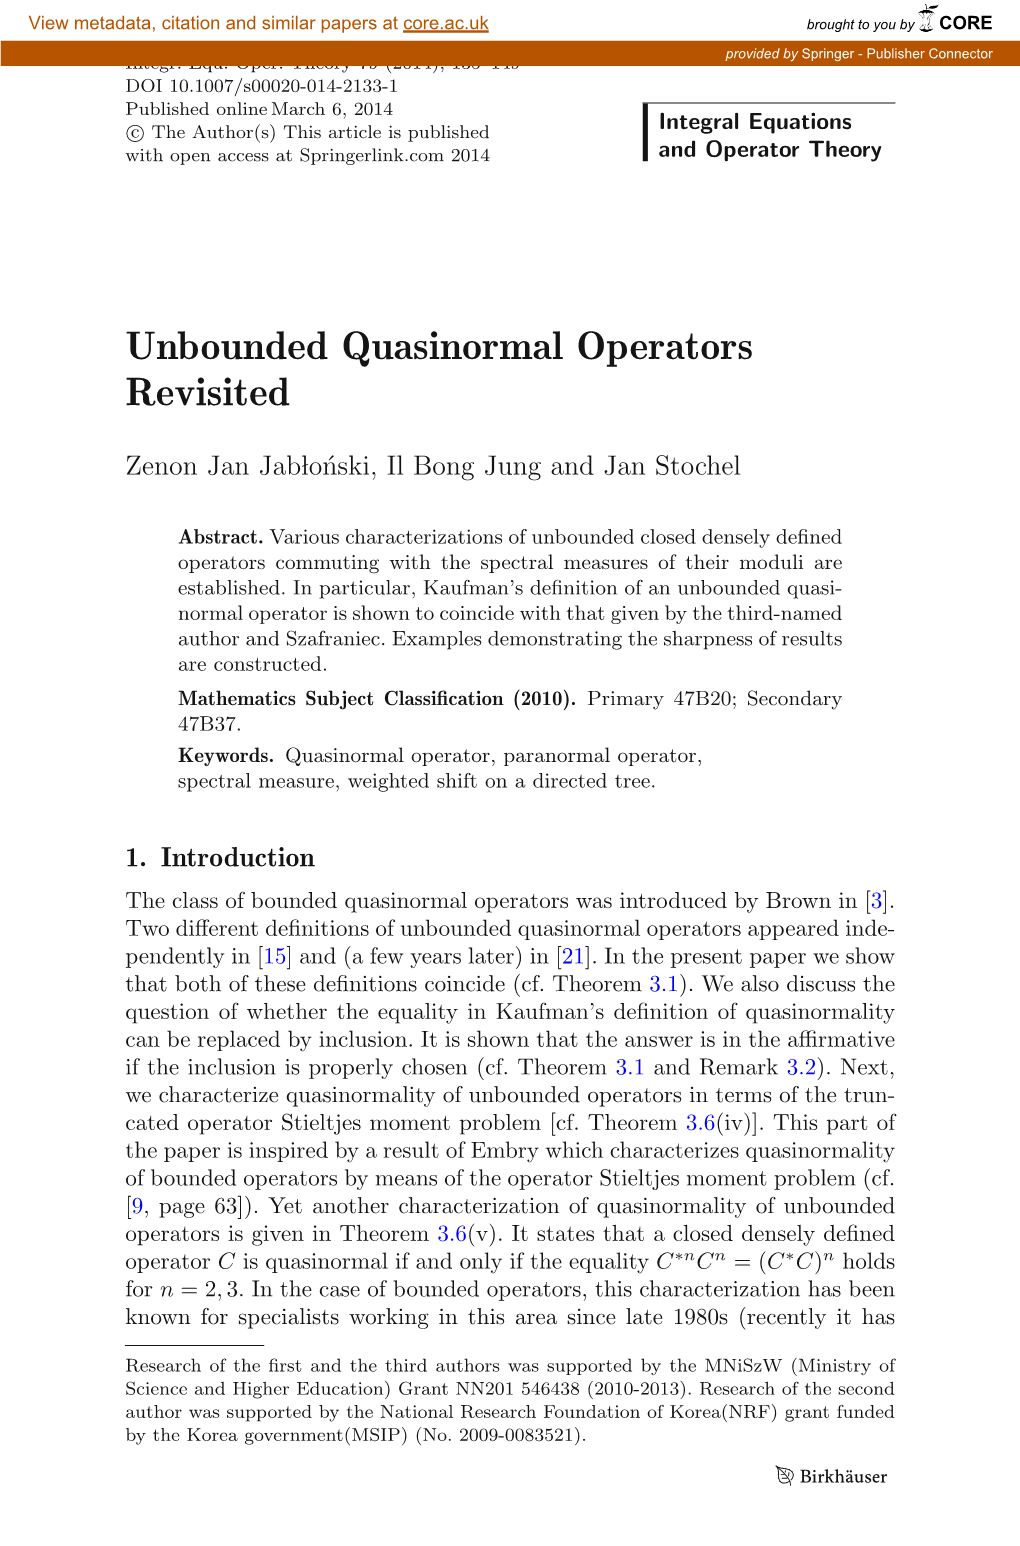 Unbounded Quasinormal Operators Revisited